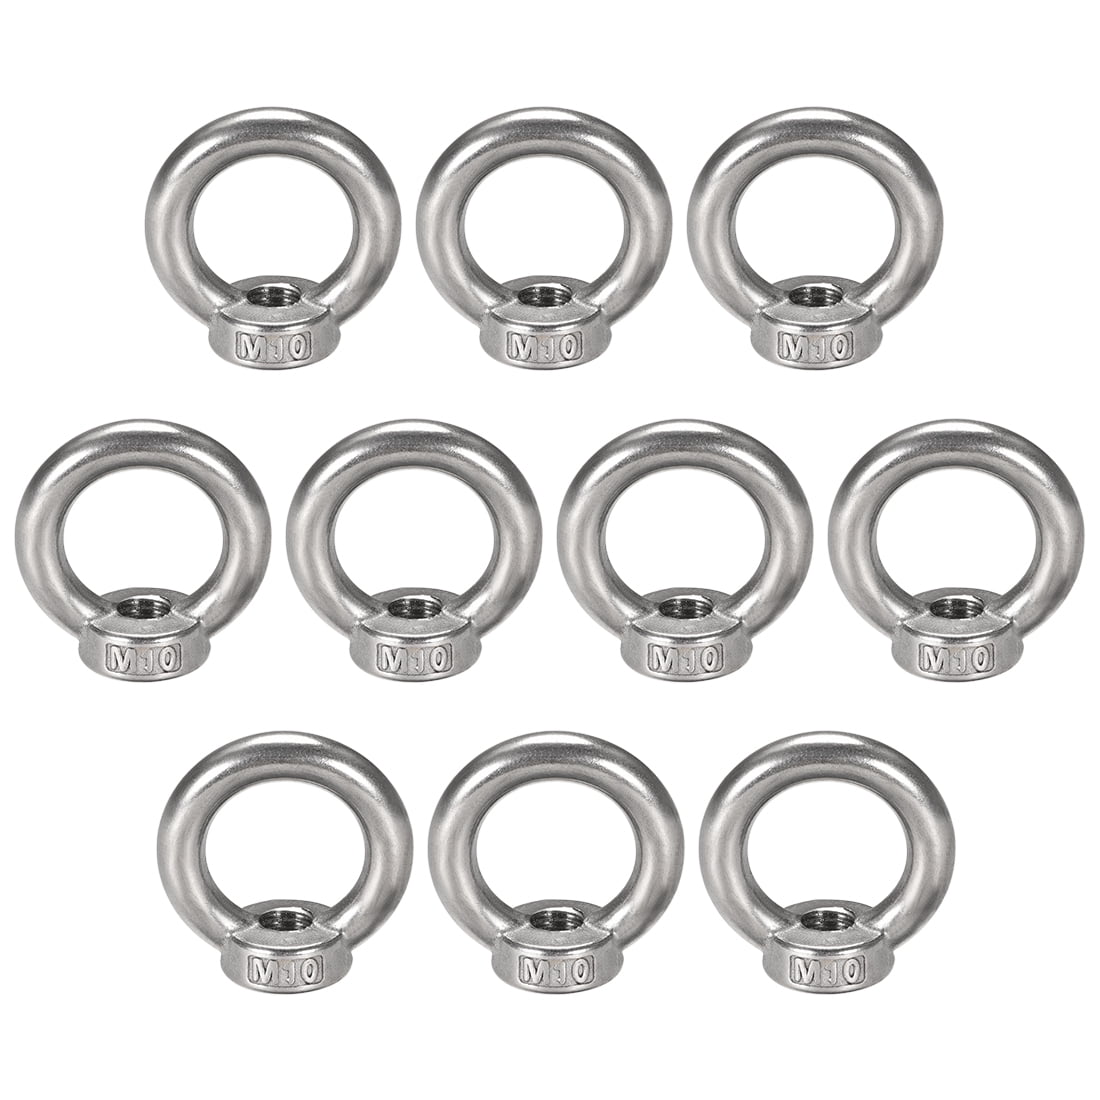 New 6 x M10  Lifting Eye Nuts 316 Grade Stainless Steel M10 Eye Nuts x 6 Pieces 